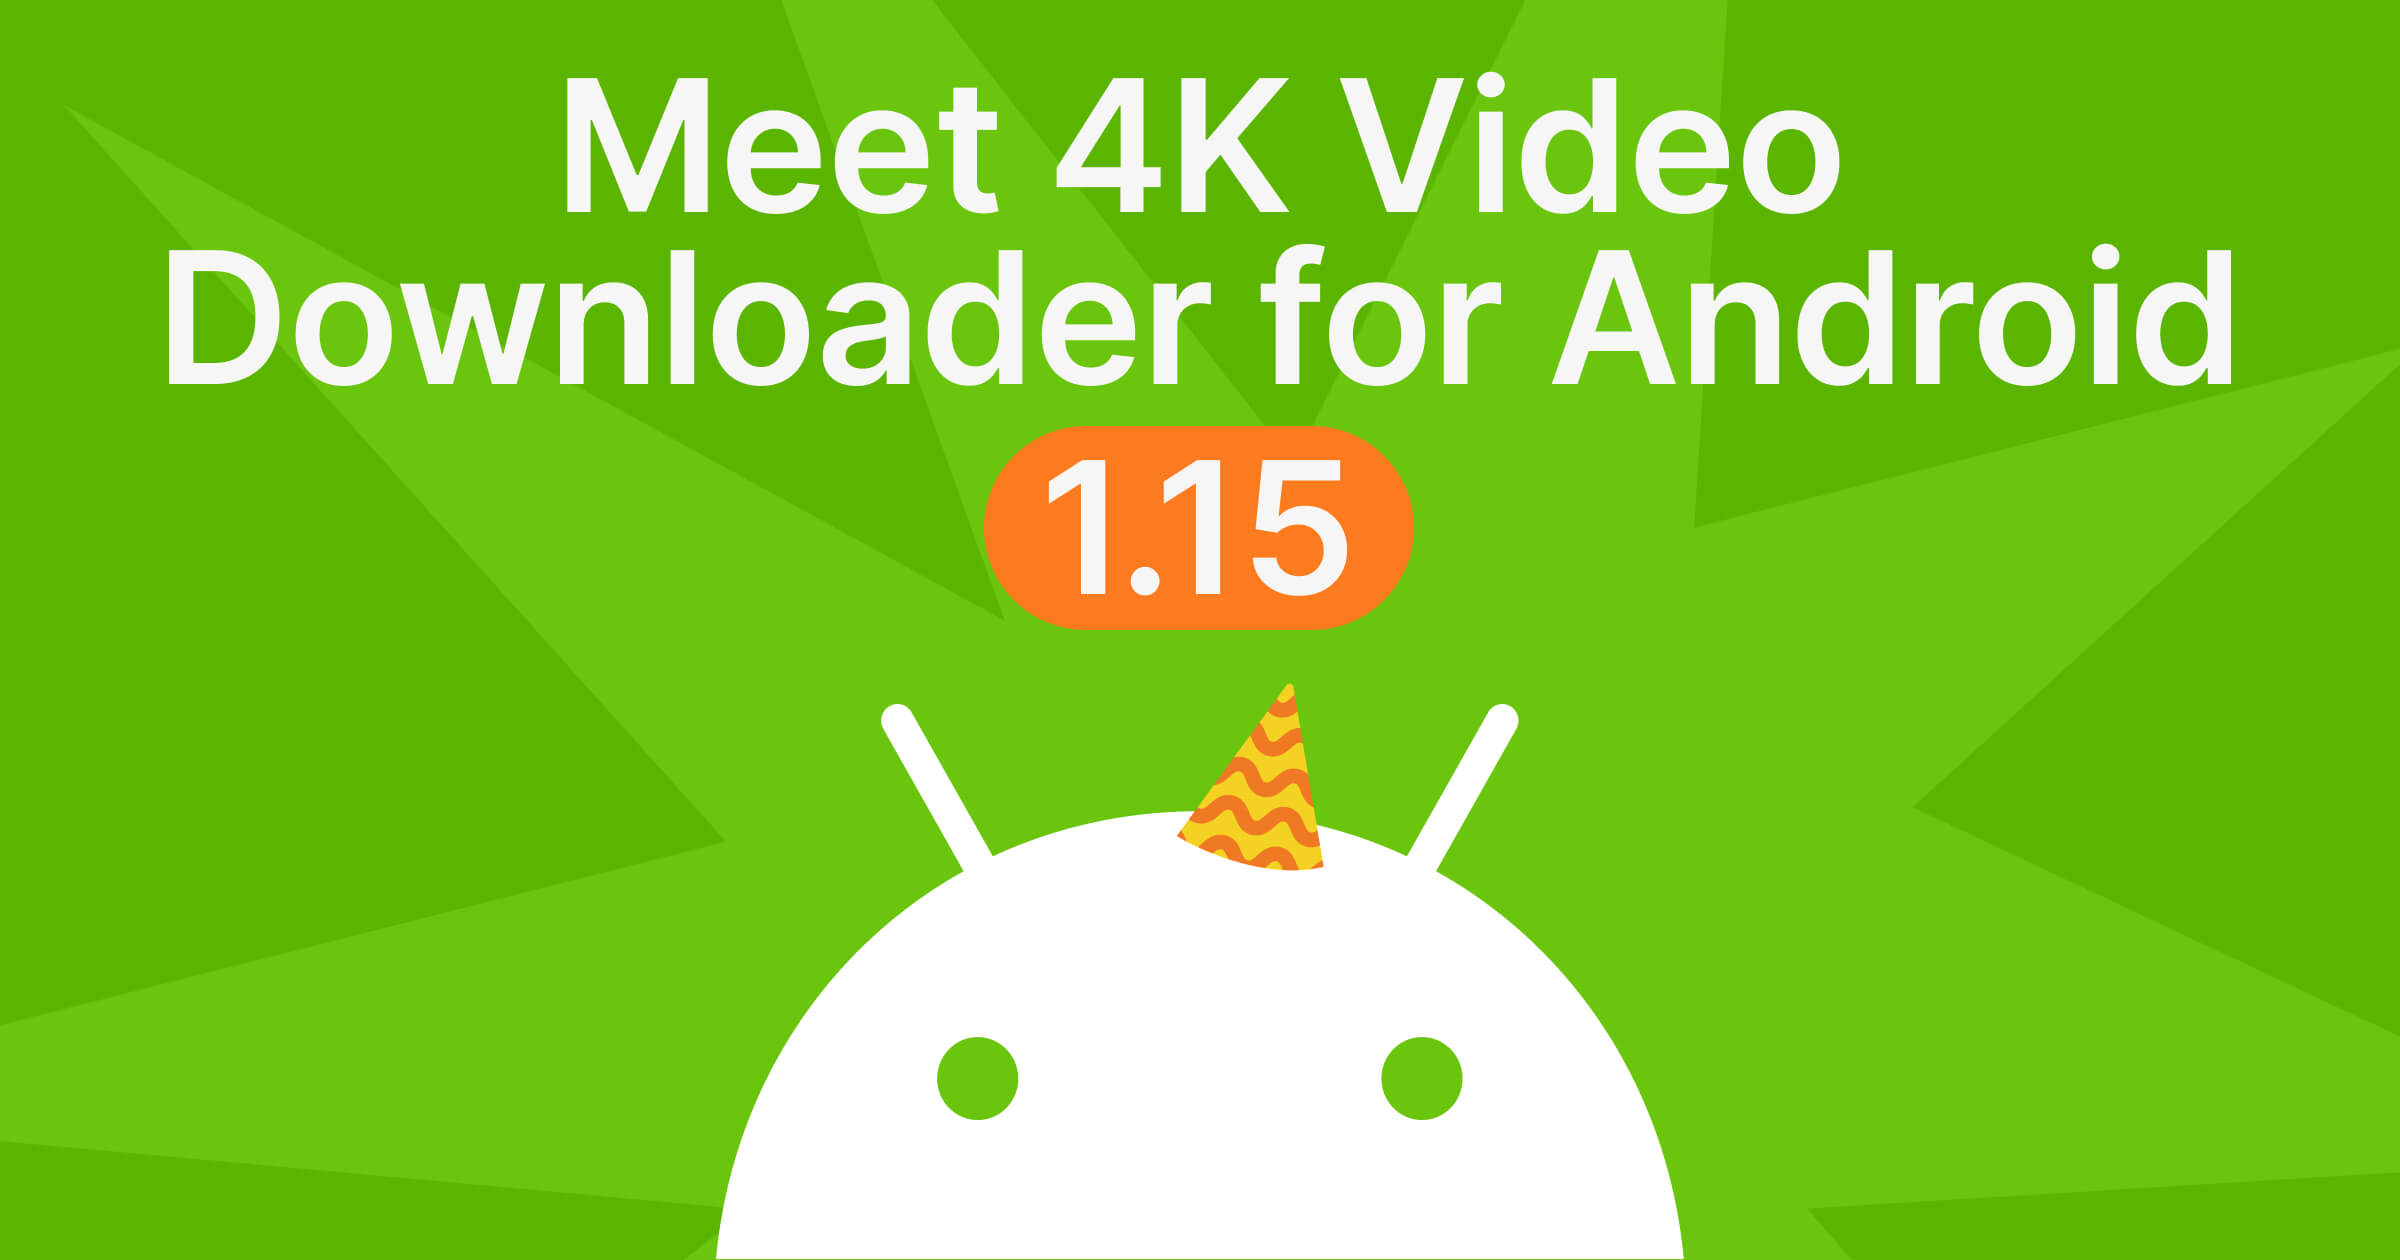 Meet 4K Video Downloader for Android 1.15—Armv8 Support & Improved Performance